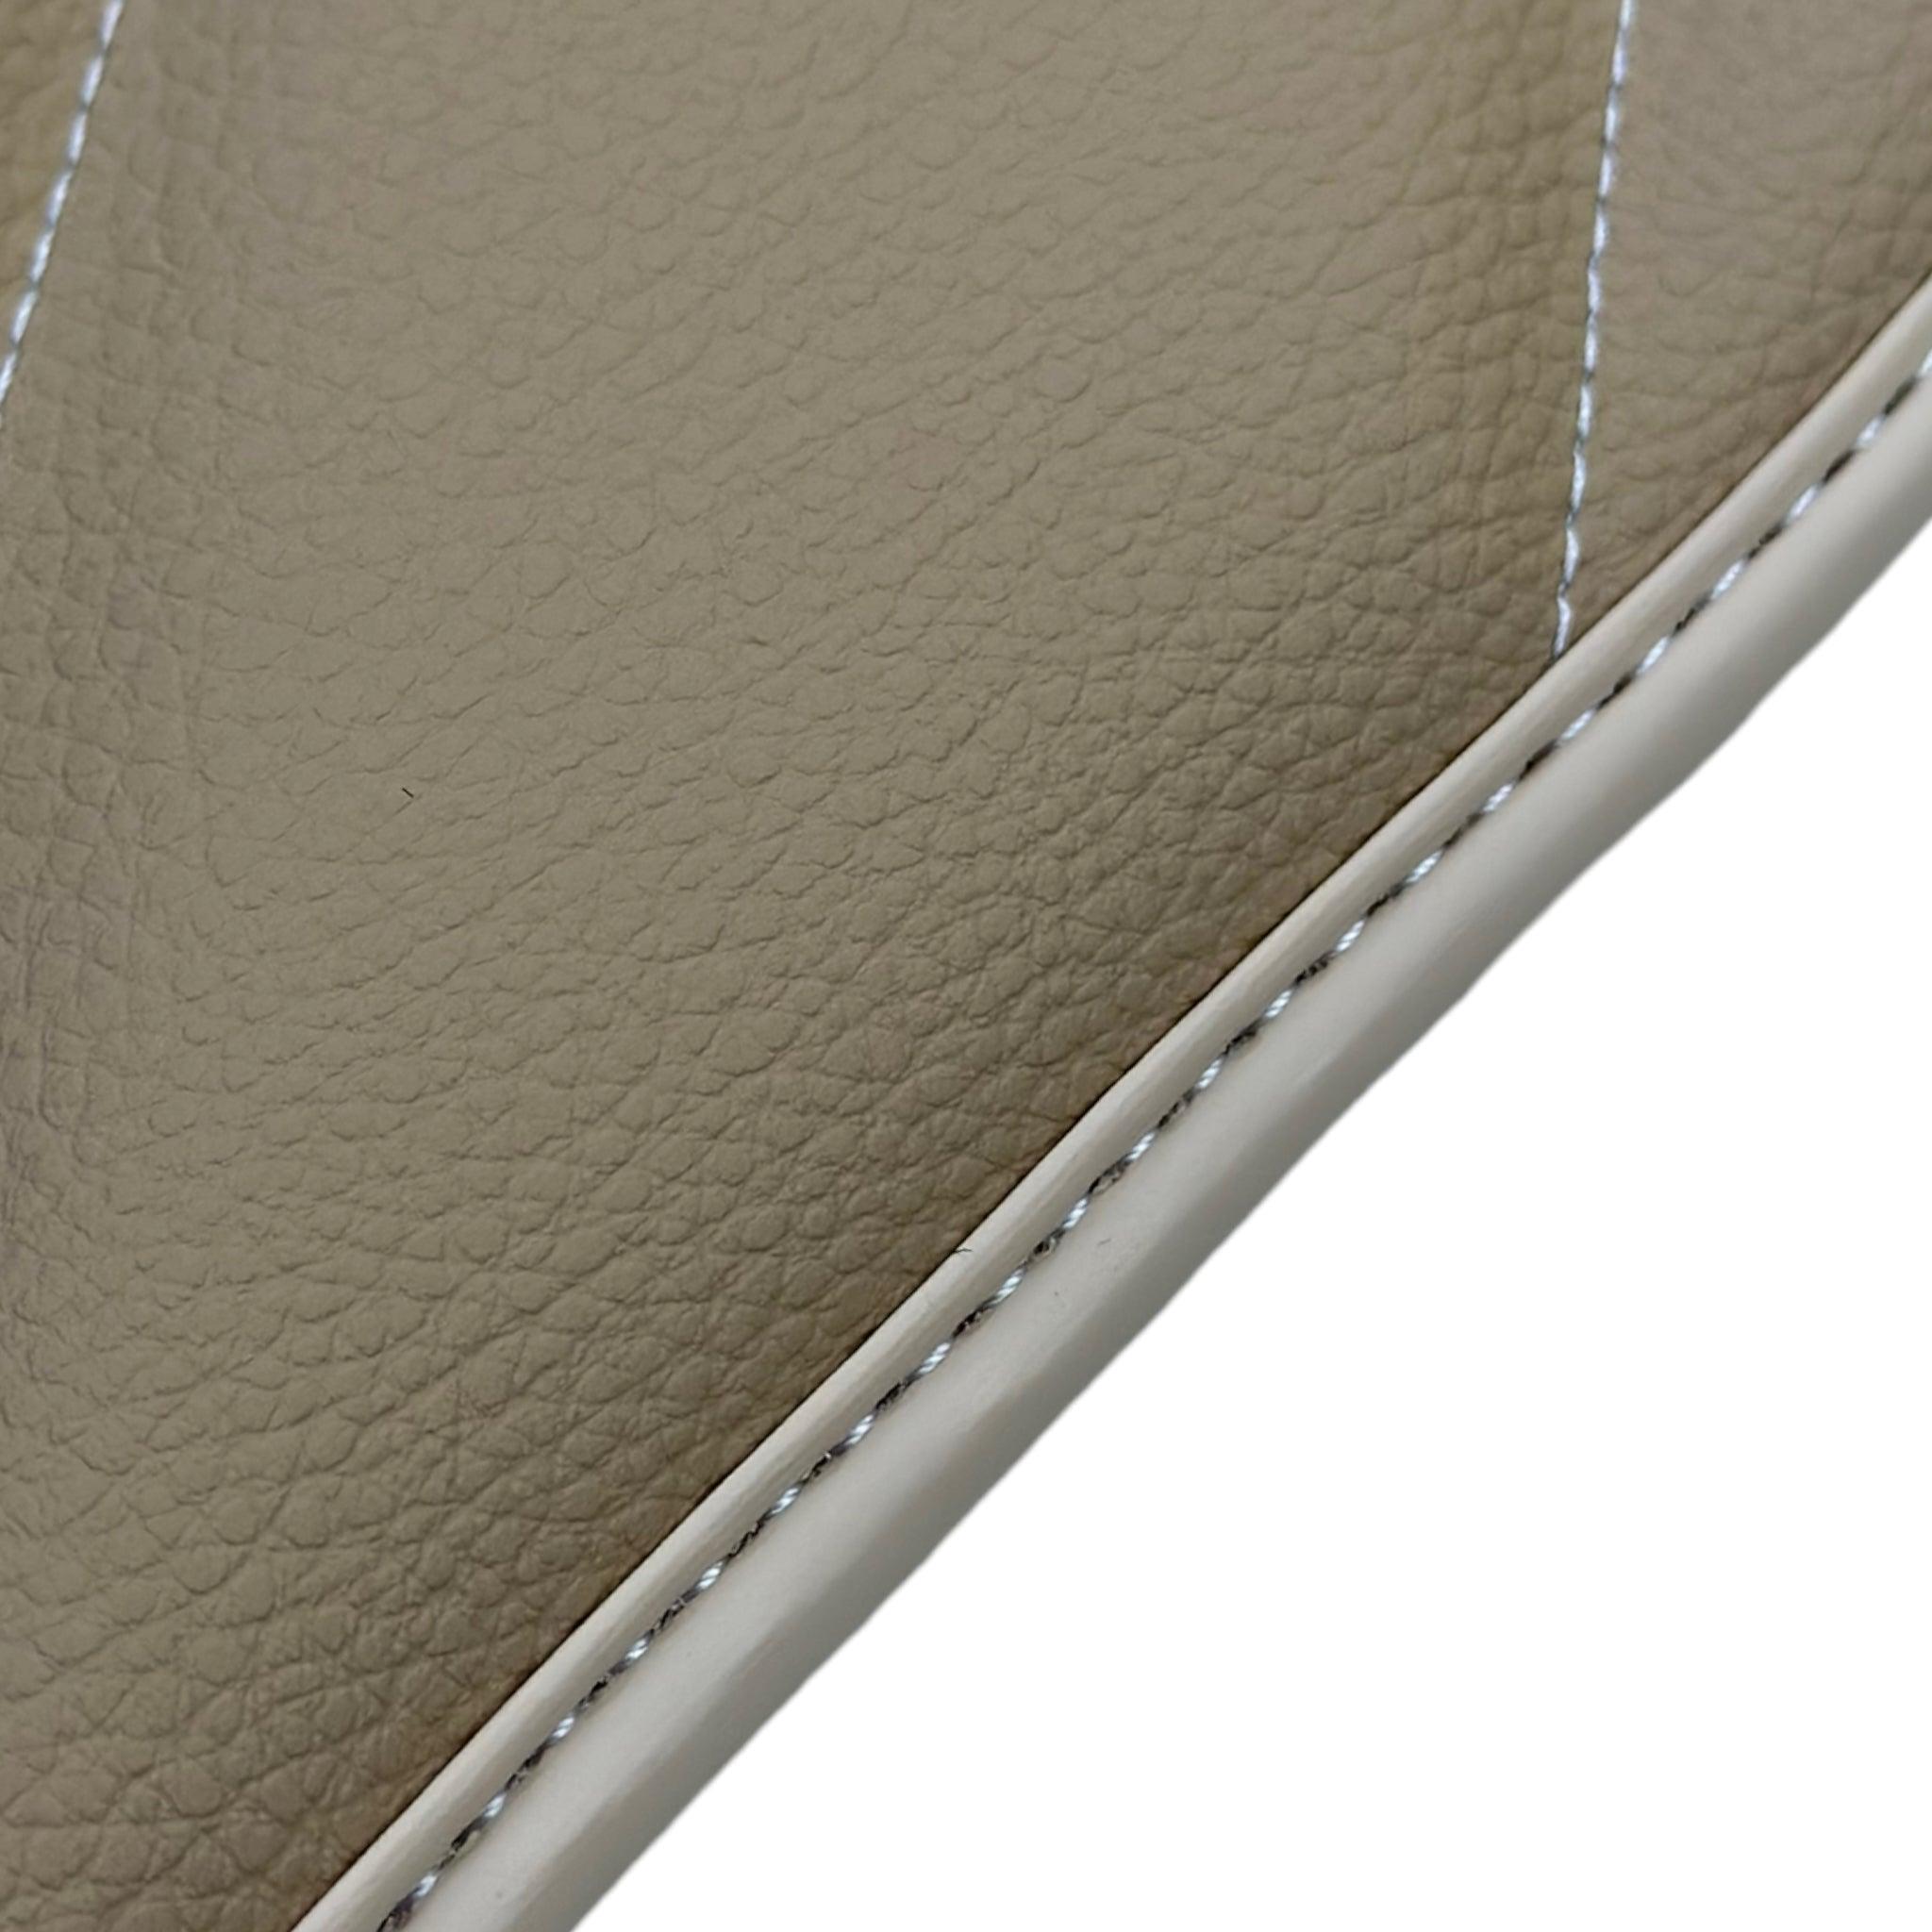 Beige Leather Floor Mats For Mercedes Benz C-Class C204 Coupe (2011-2015)